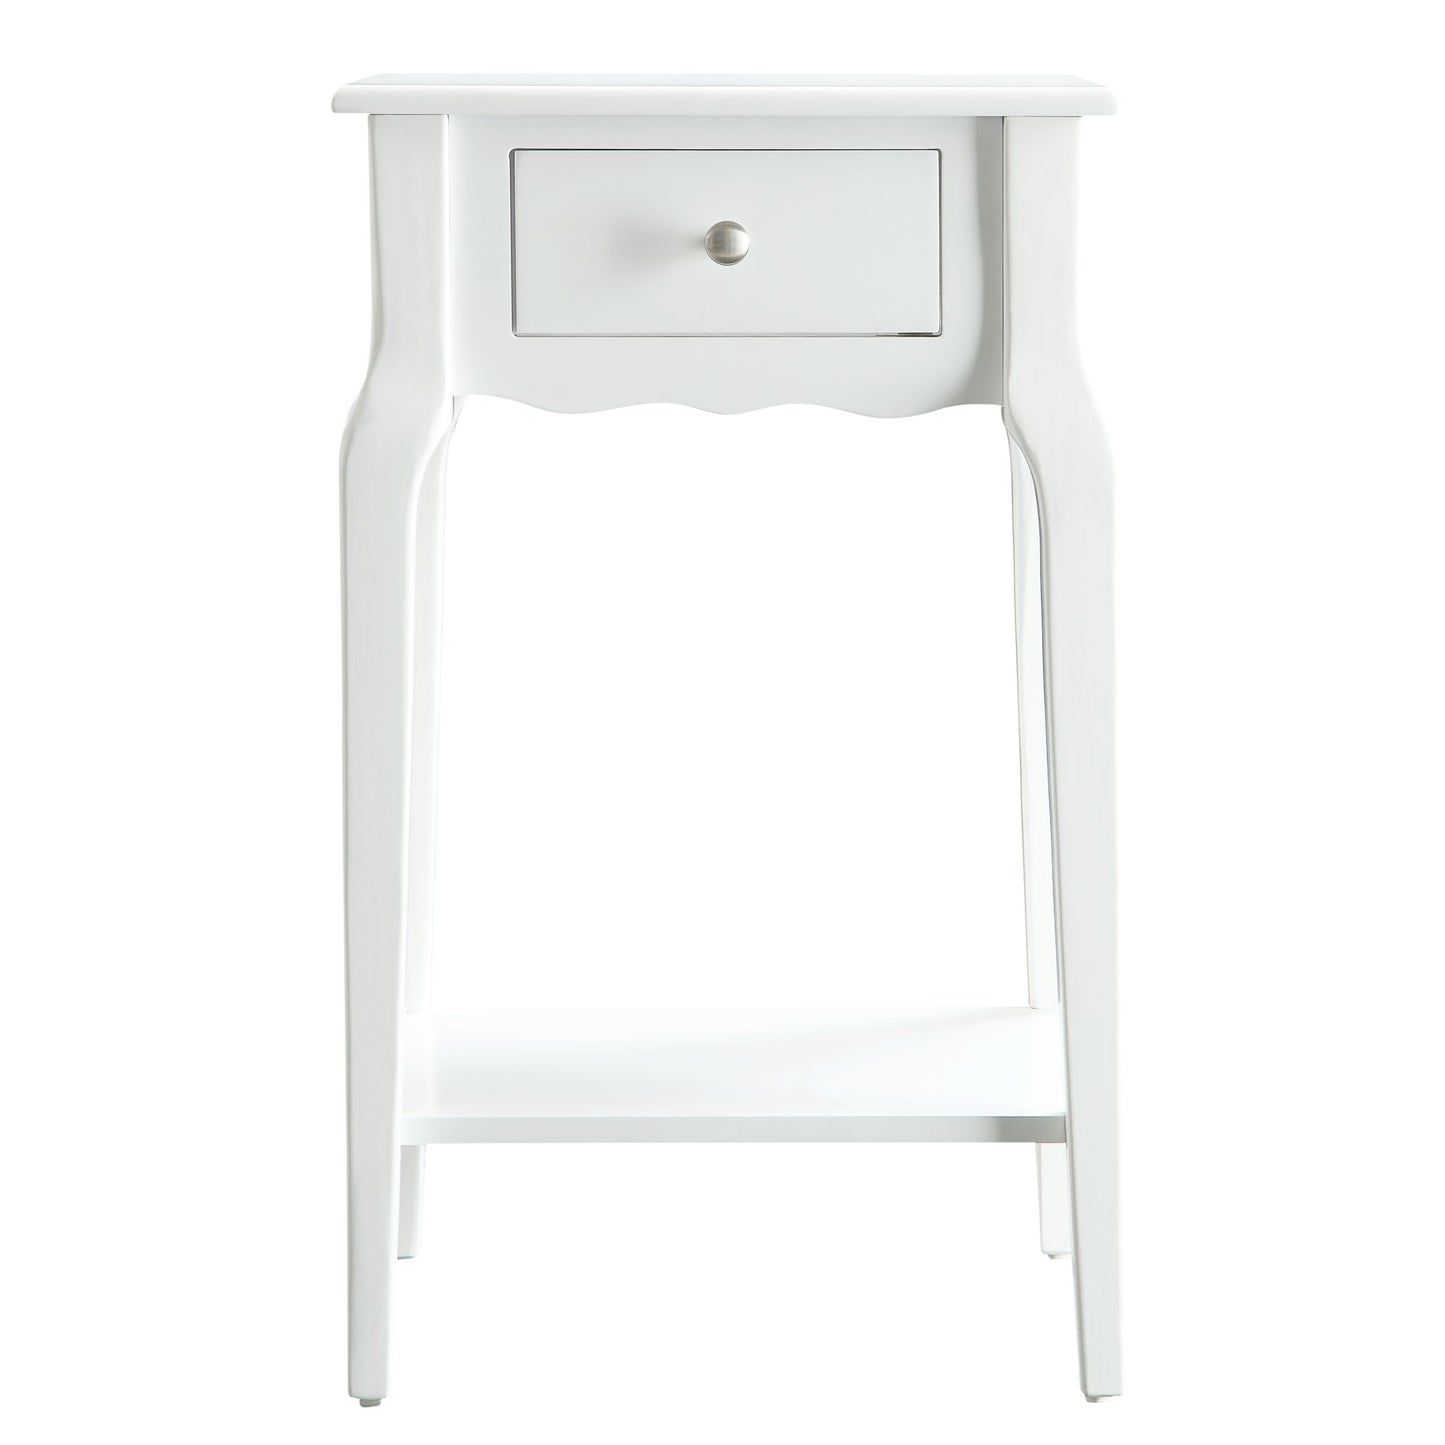 1-Drawer Wood Storage End Table - White